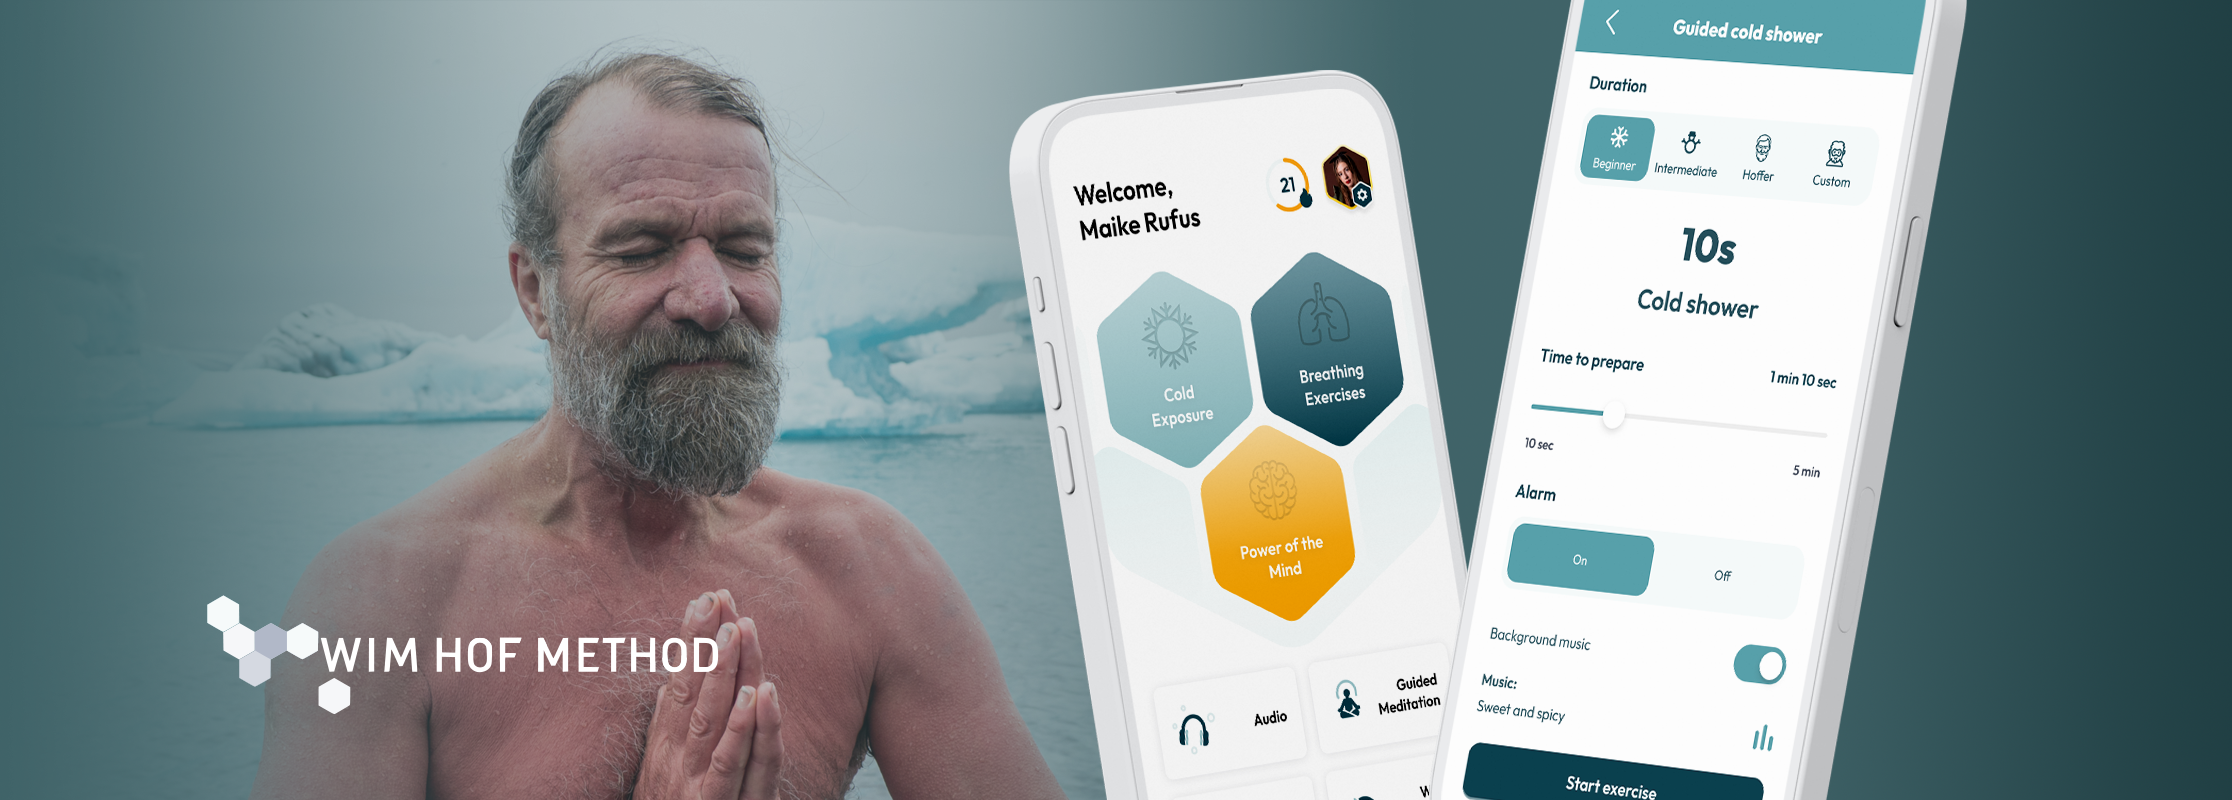 Wim Hof: The digital guide to self-improvement with 'The Iceman'